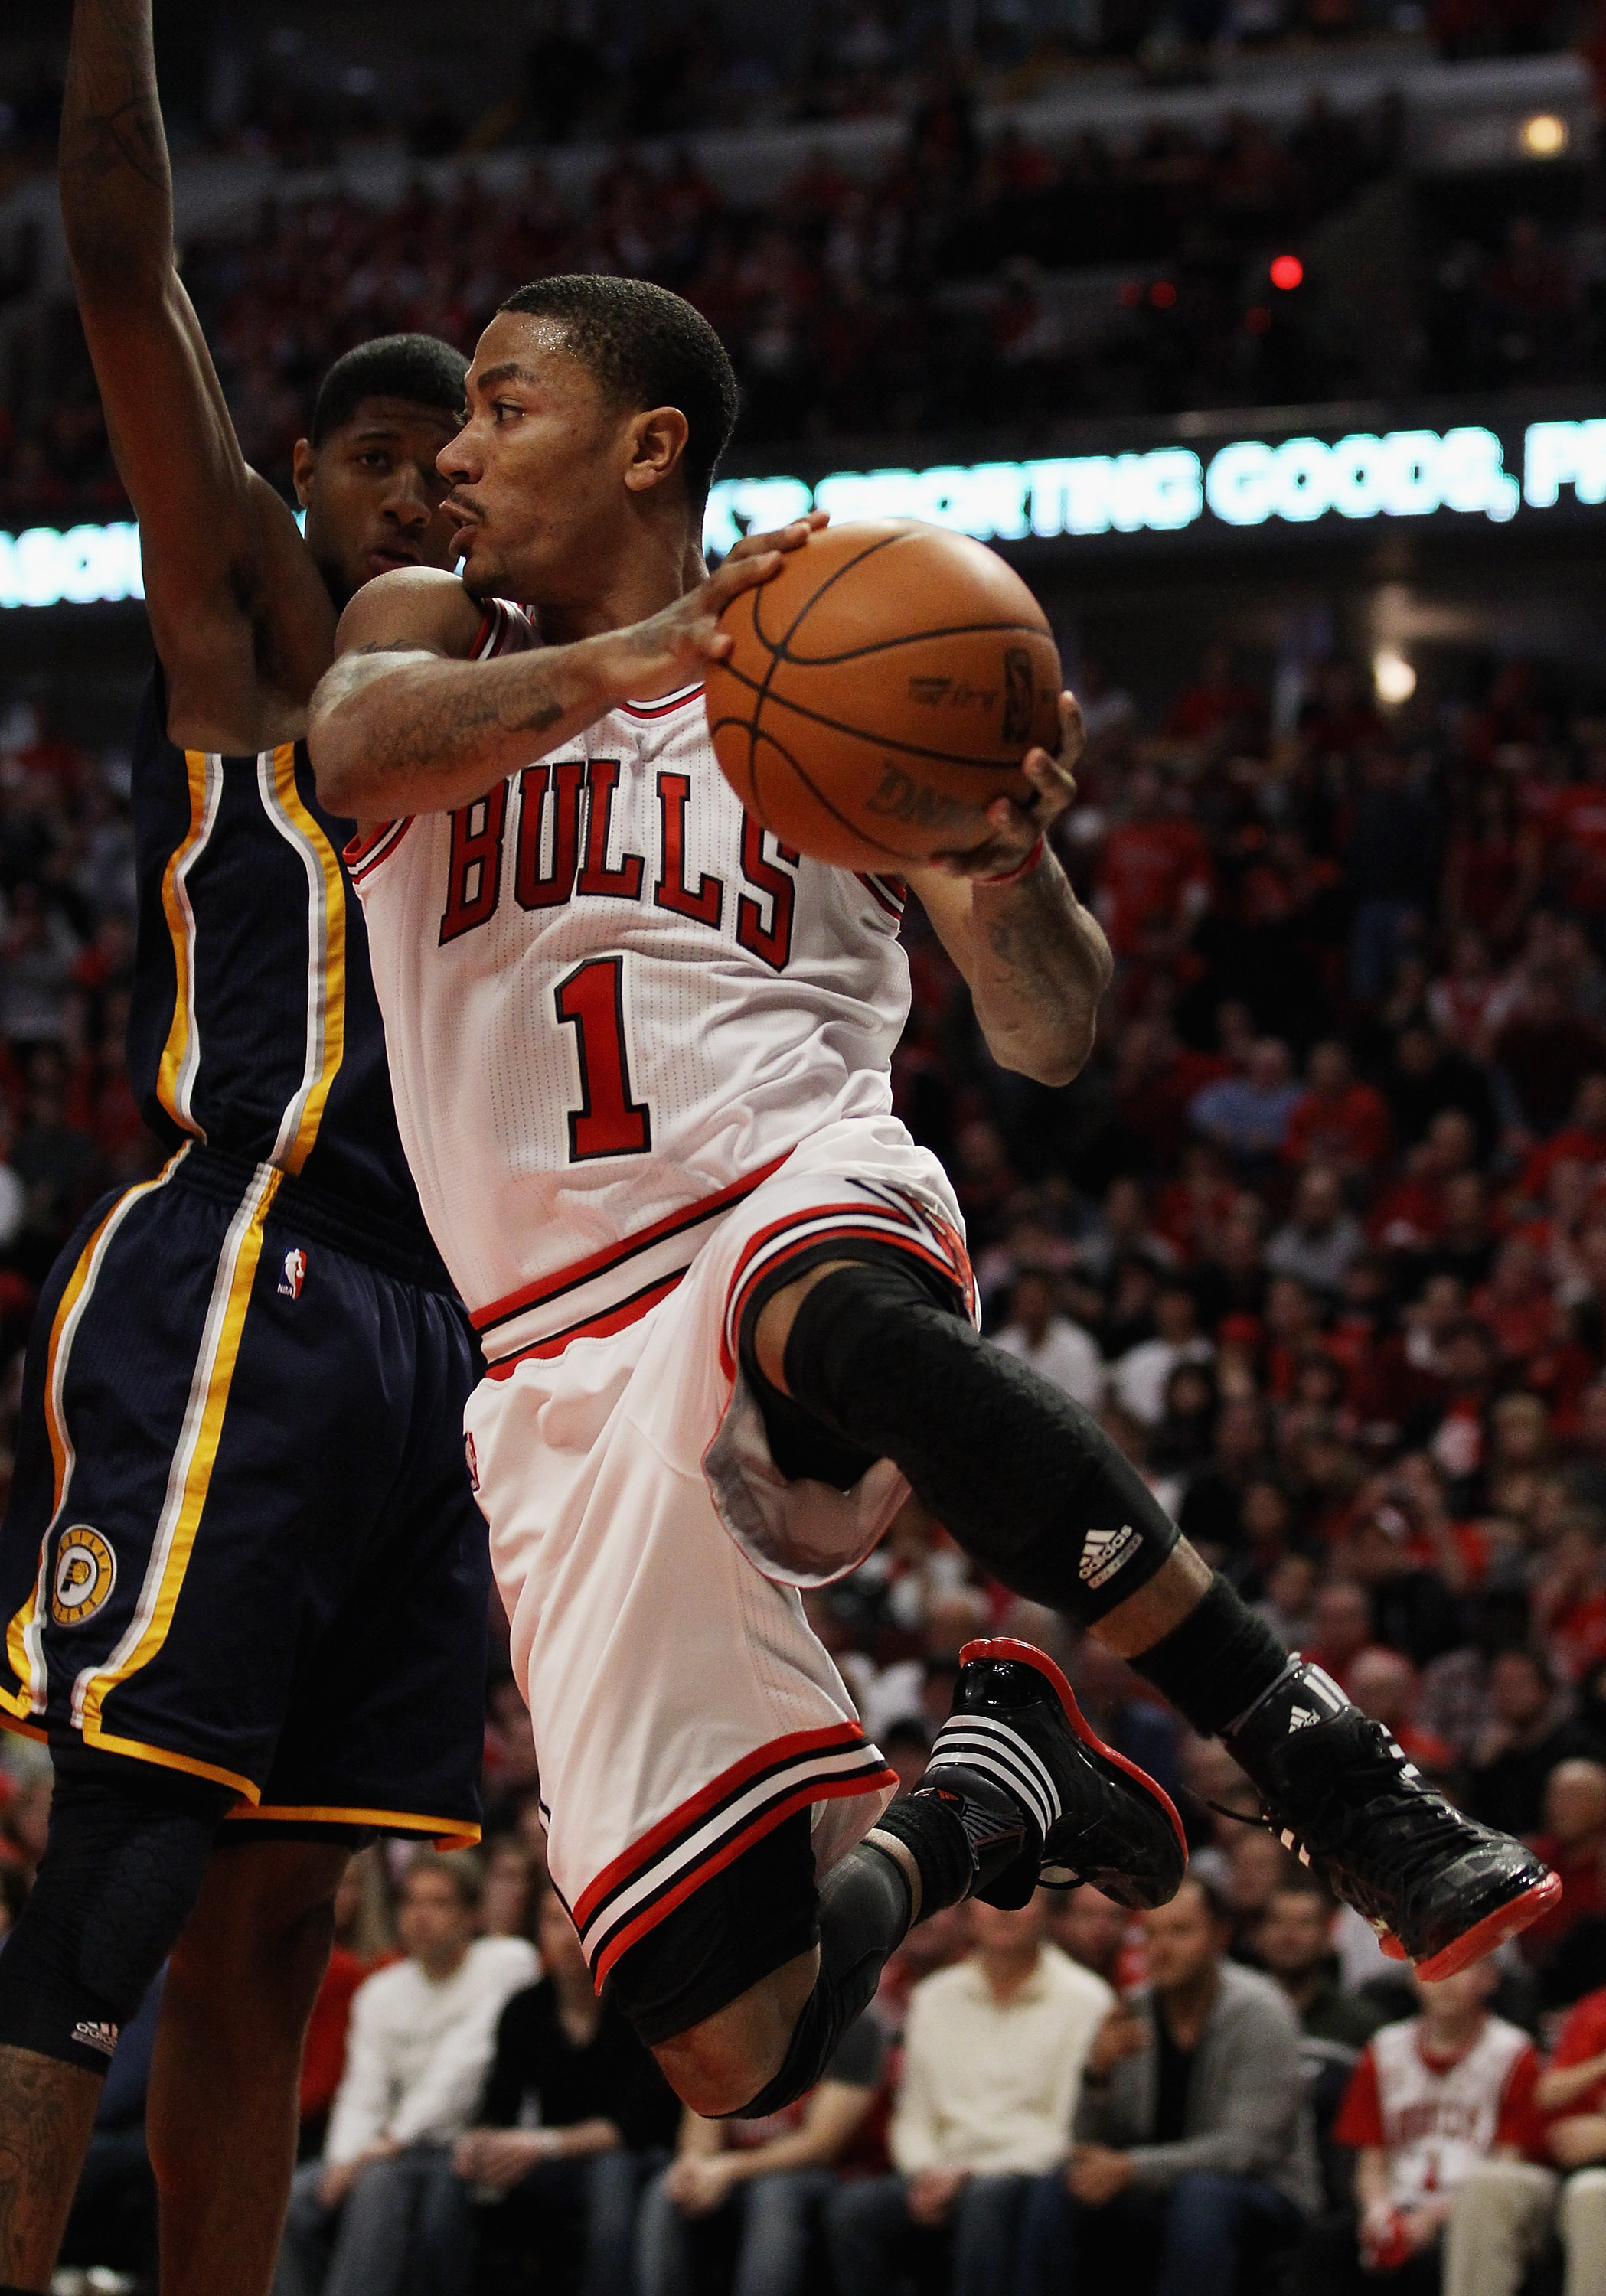 CHICAGO, IL - APRIL 16: Derrick Rose #1 of the Chicago Bulls leaps to pass the ball around Paul George #24 of the Indiana Pacers in Game One of the Eastern Conference Quarterfinals in the 2011 NBA Playoffs at the United Center on April 16, 2011 in Chicago